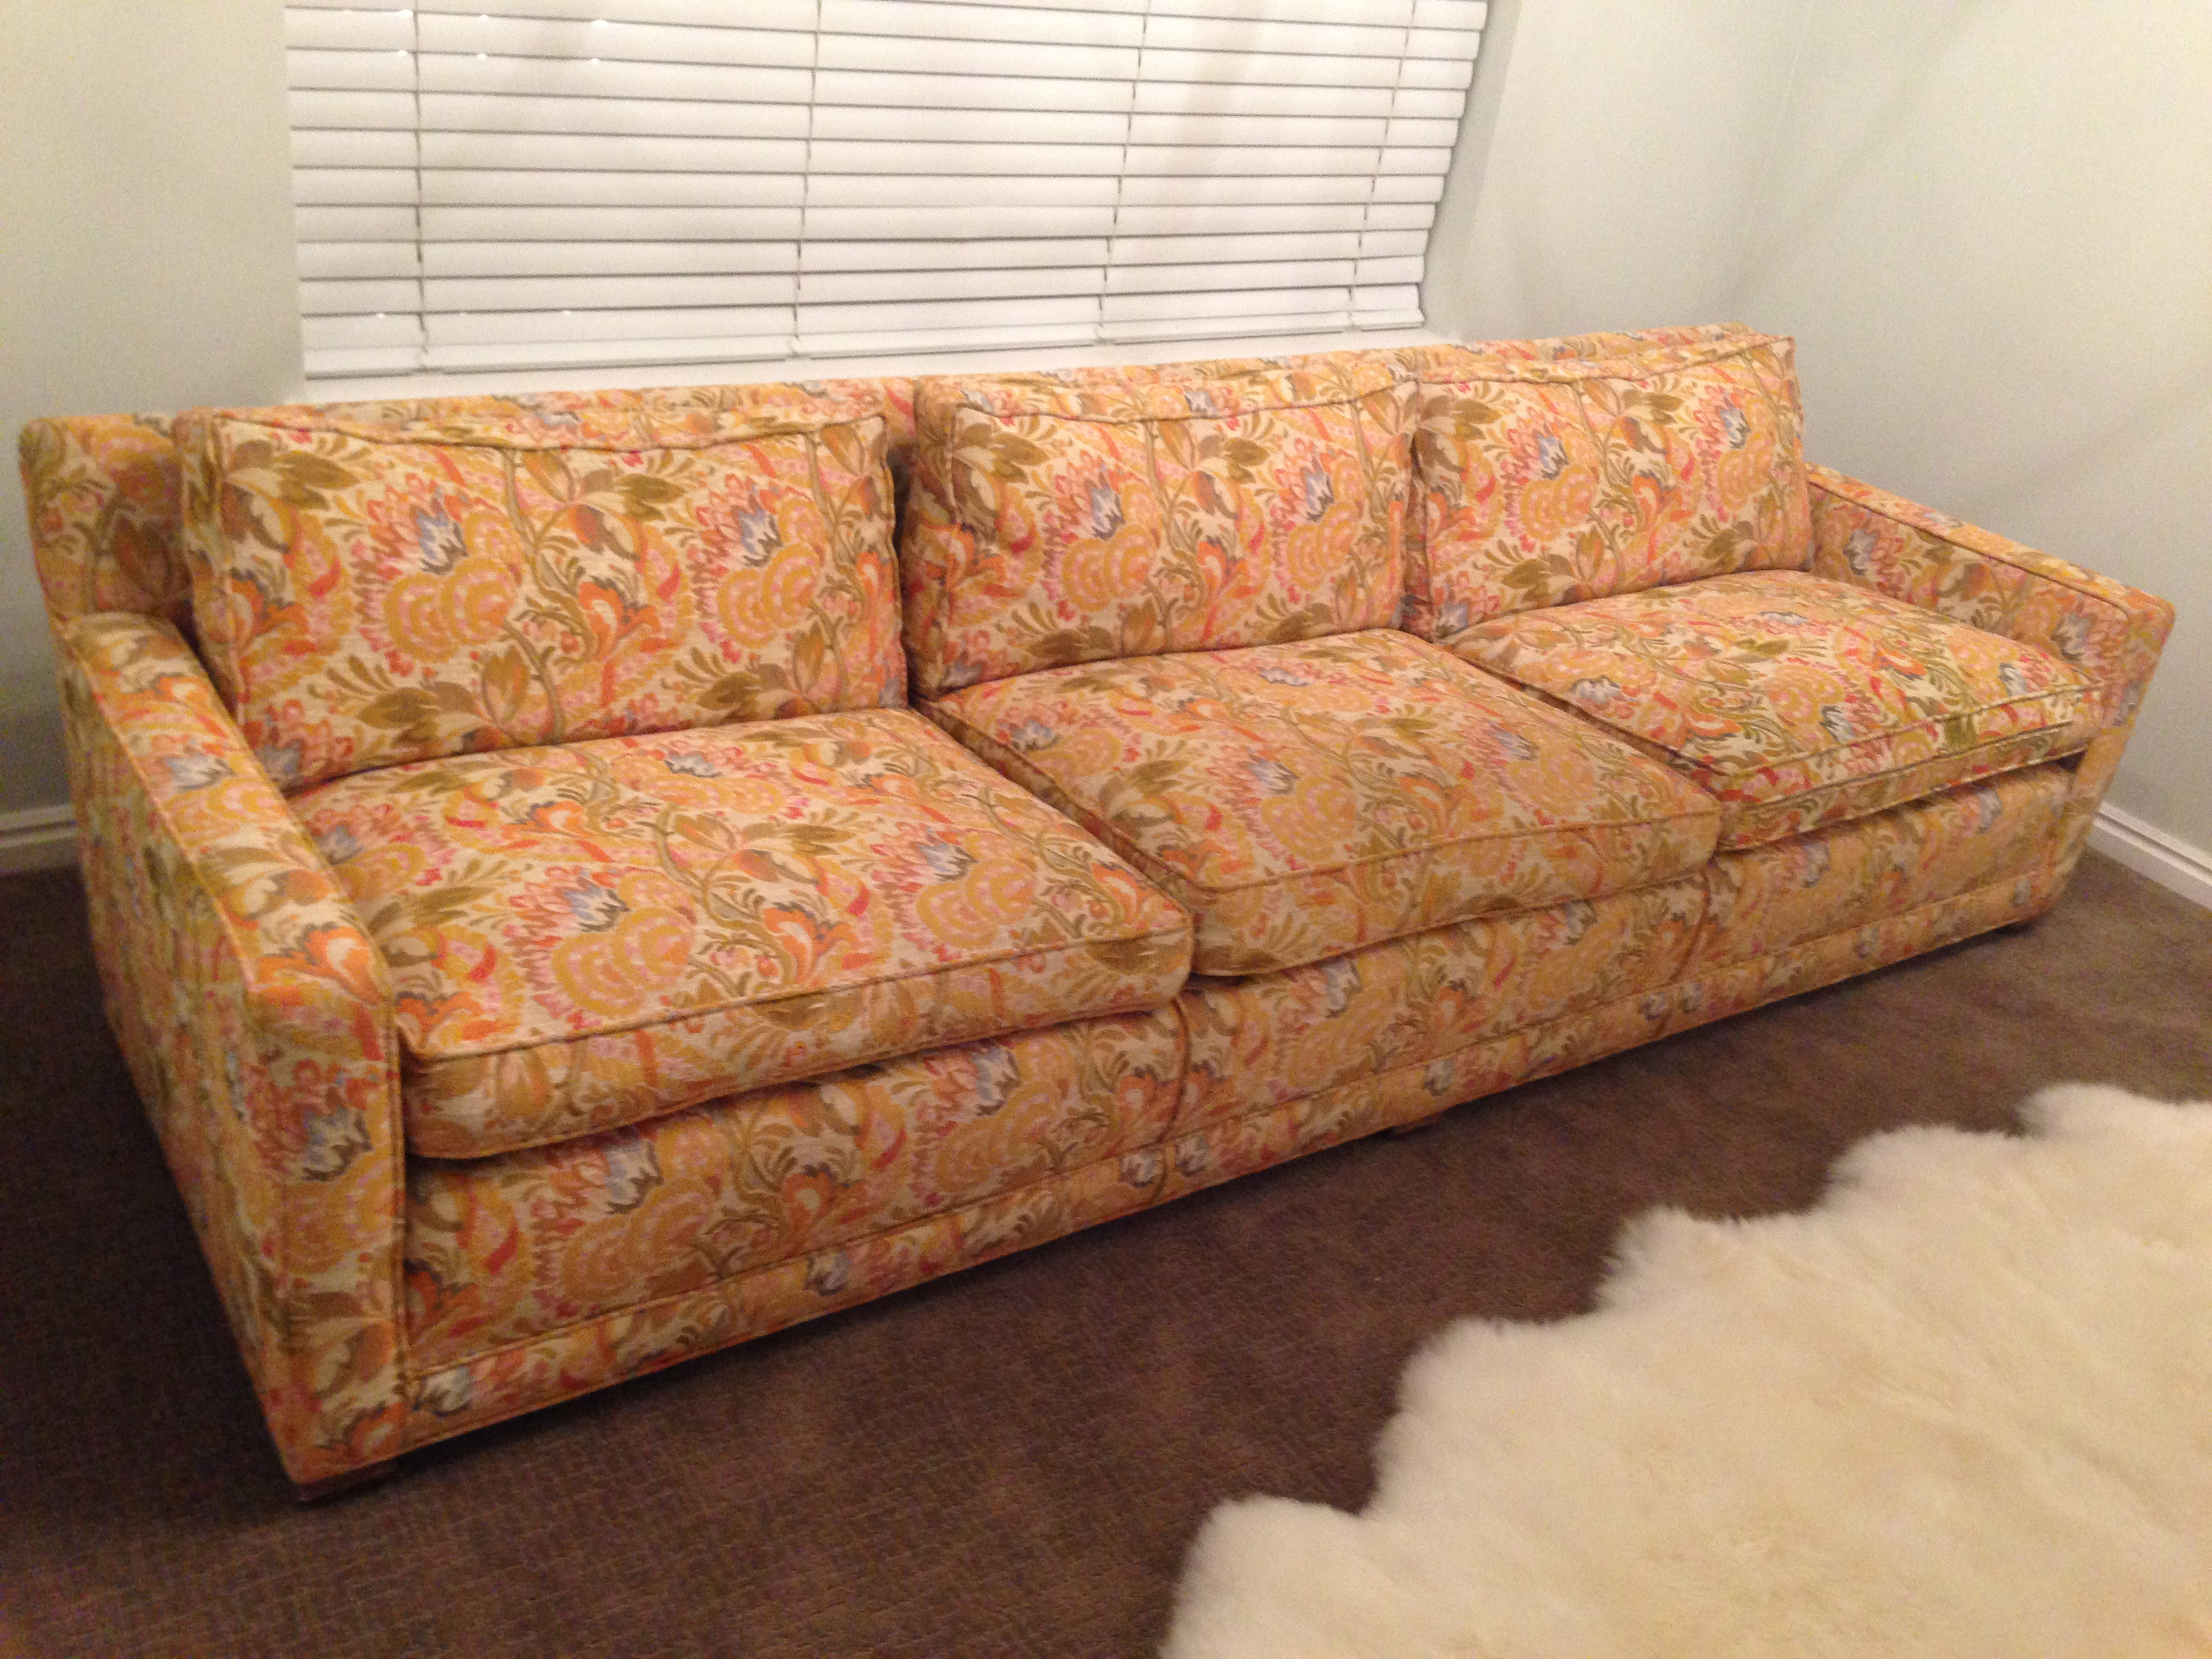 A NEW OLD SOFA - withHEART